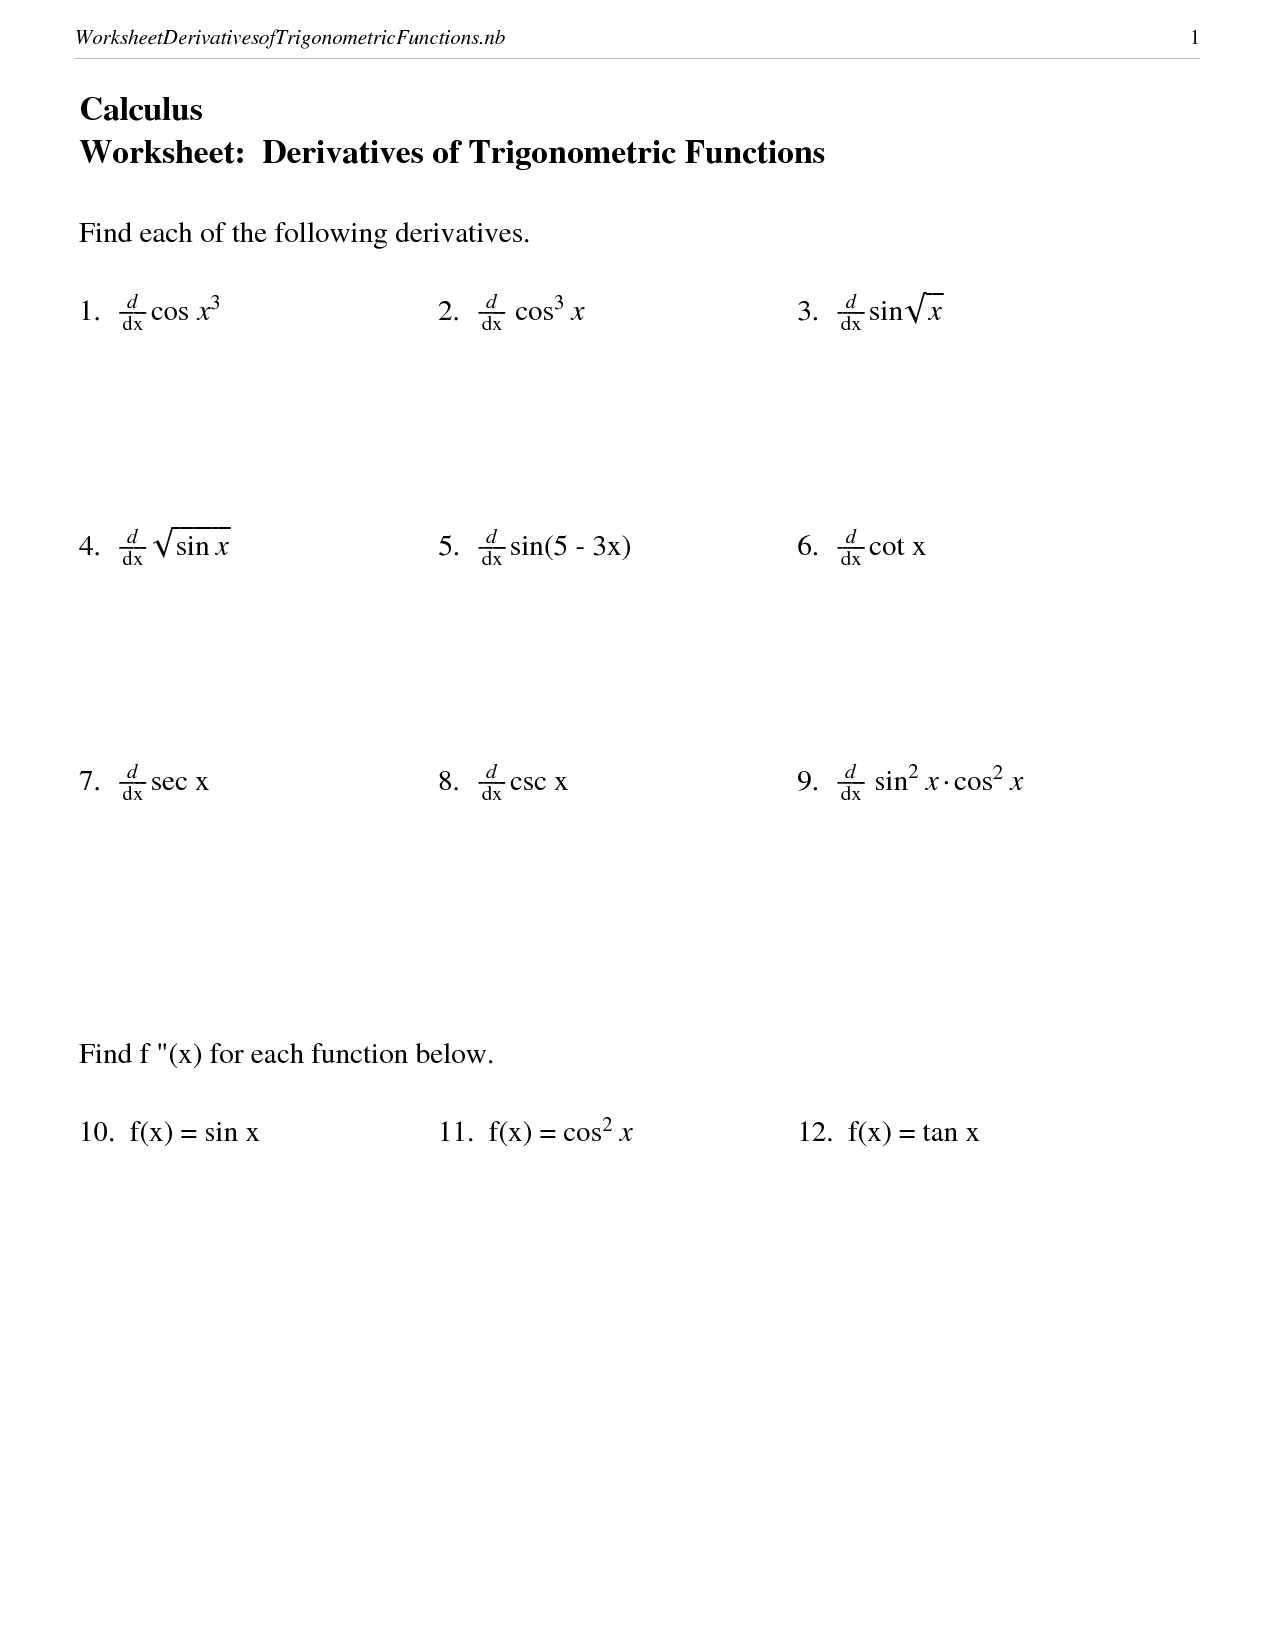 Derivative Of Inverse Trig Functions Worksheet Multiple Choice Pdf